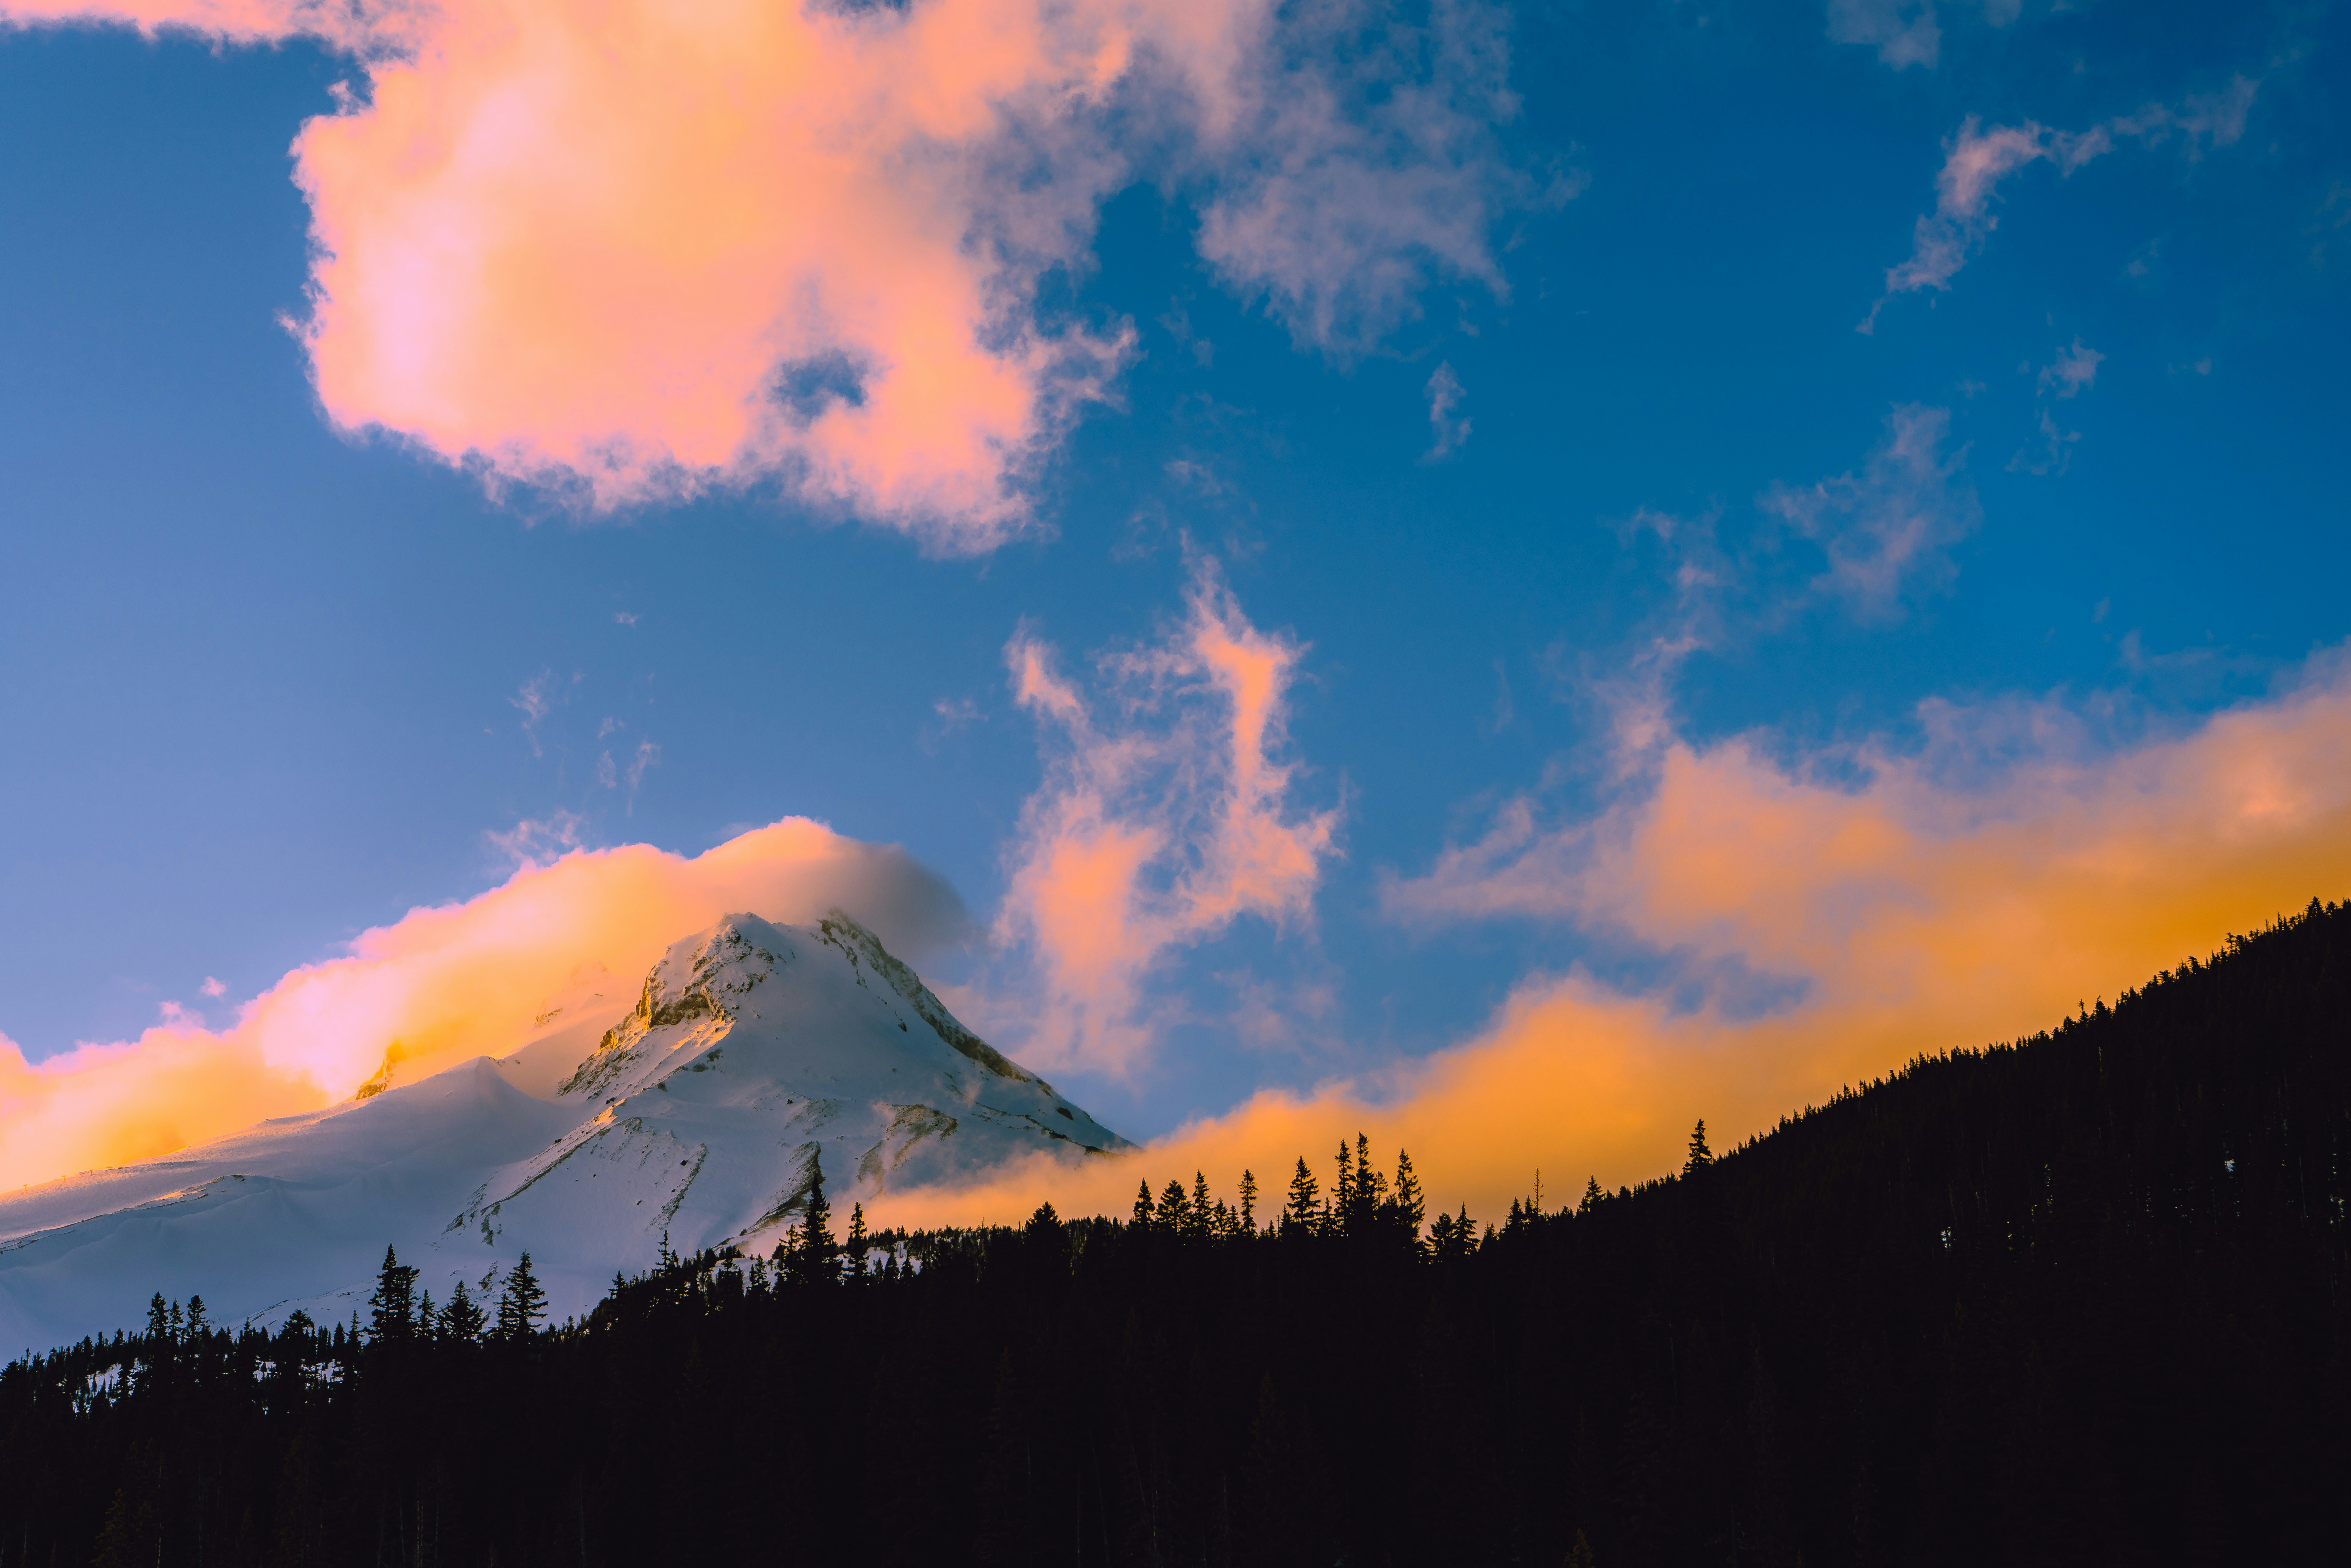 cotton candy skies over Mt Hood